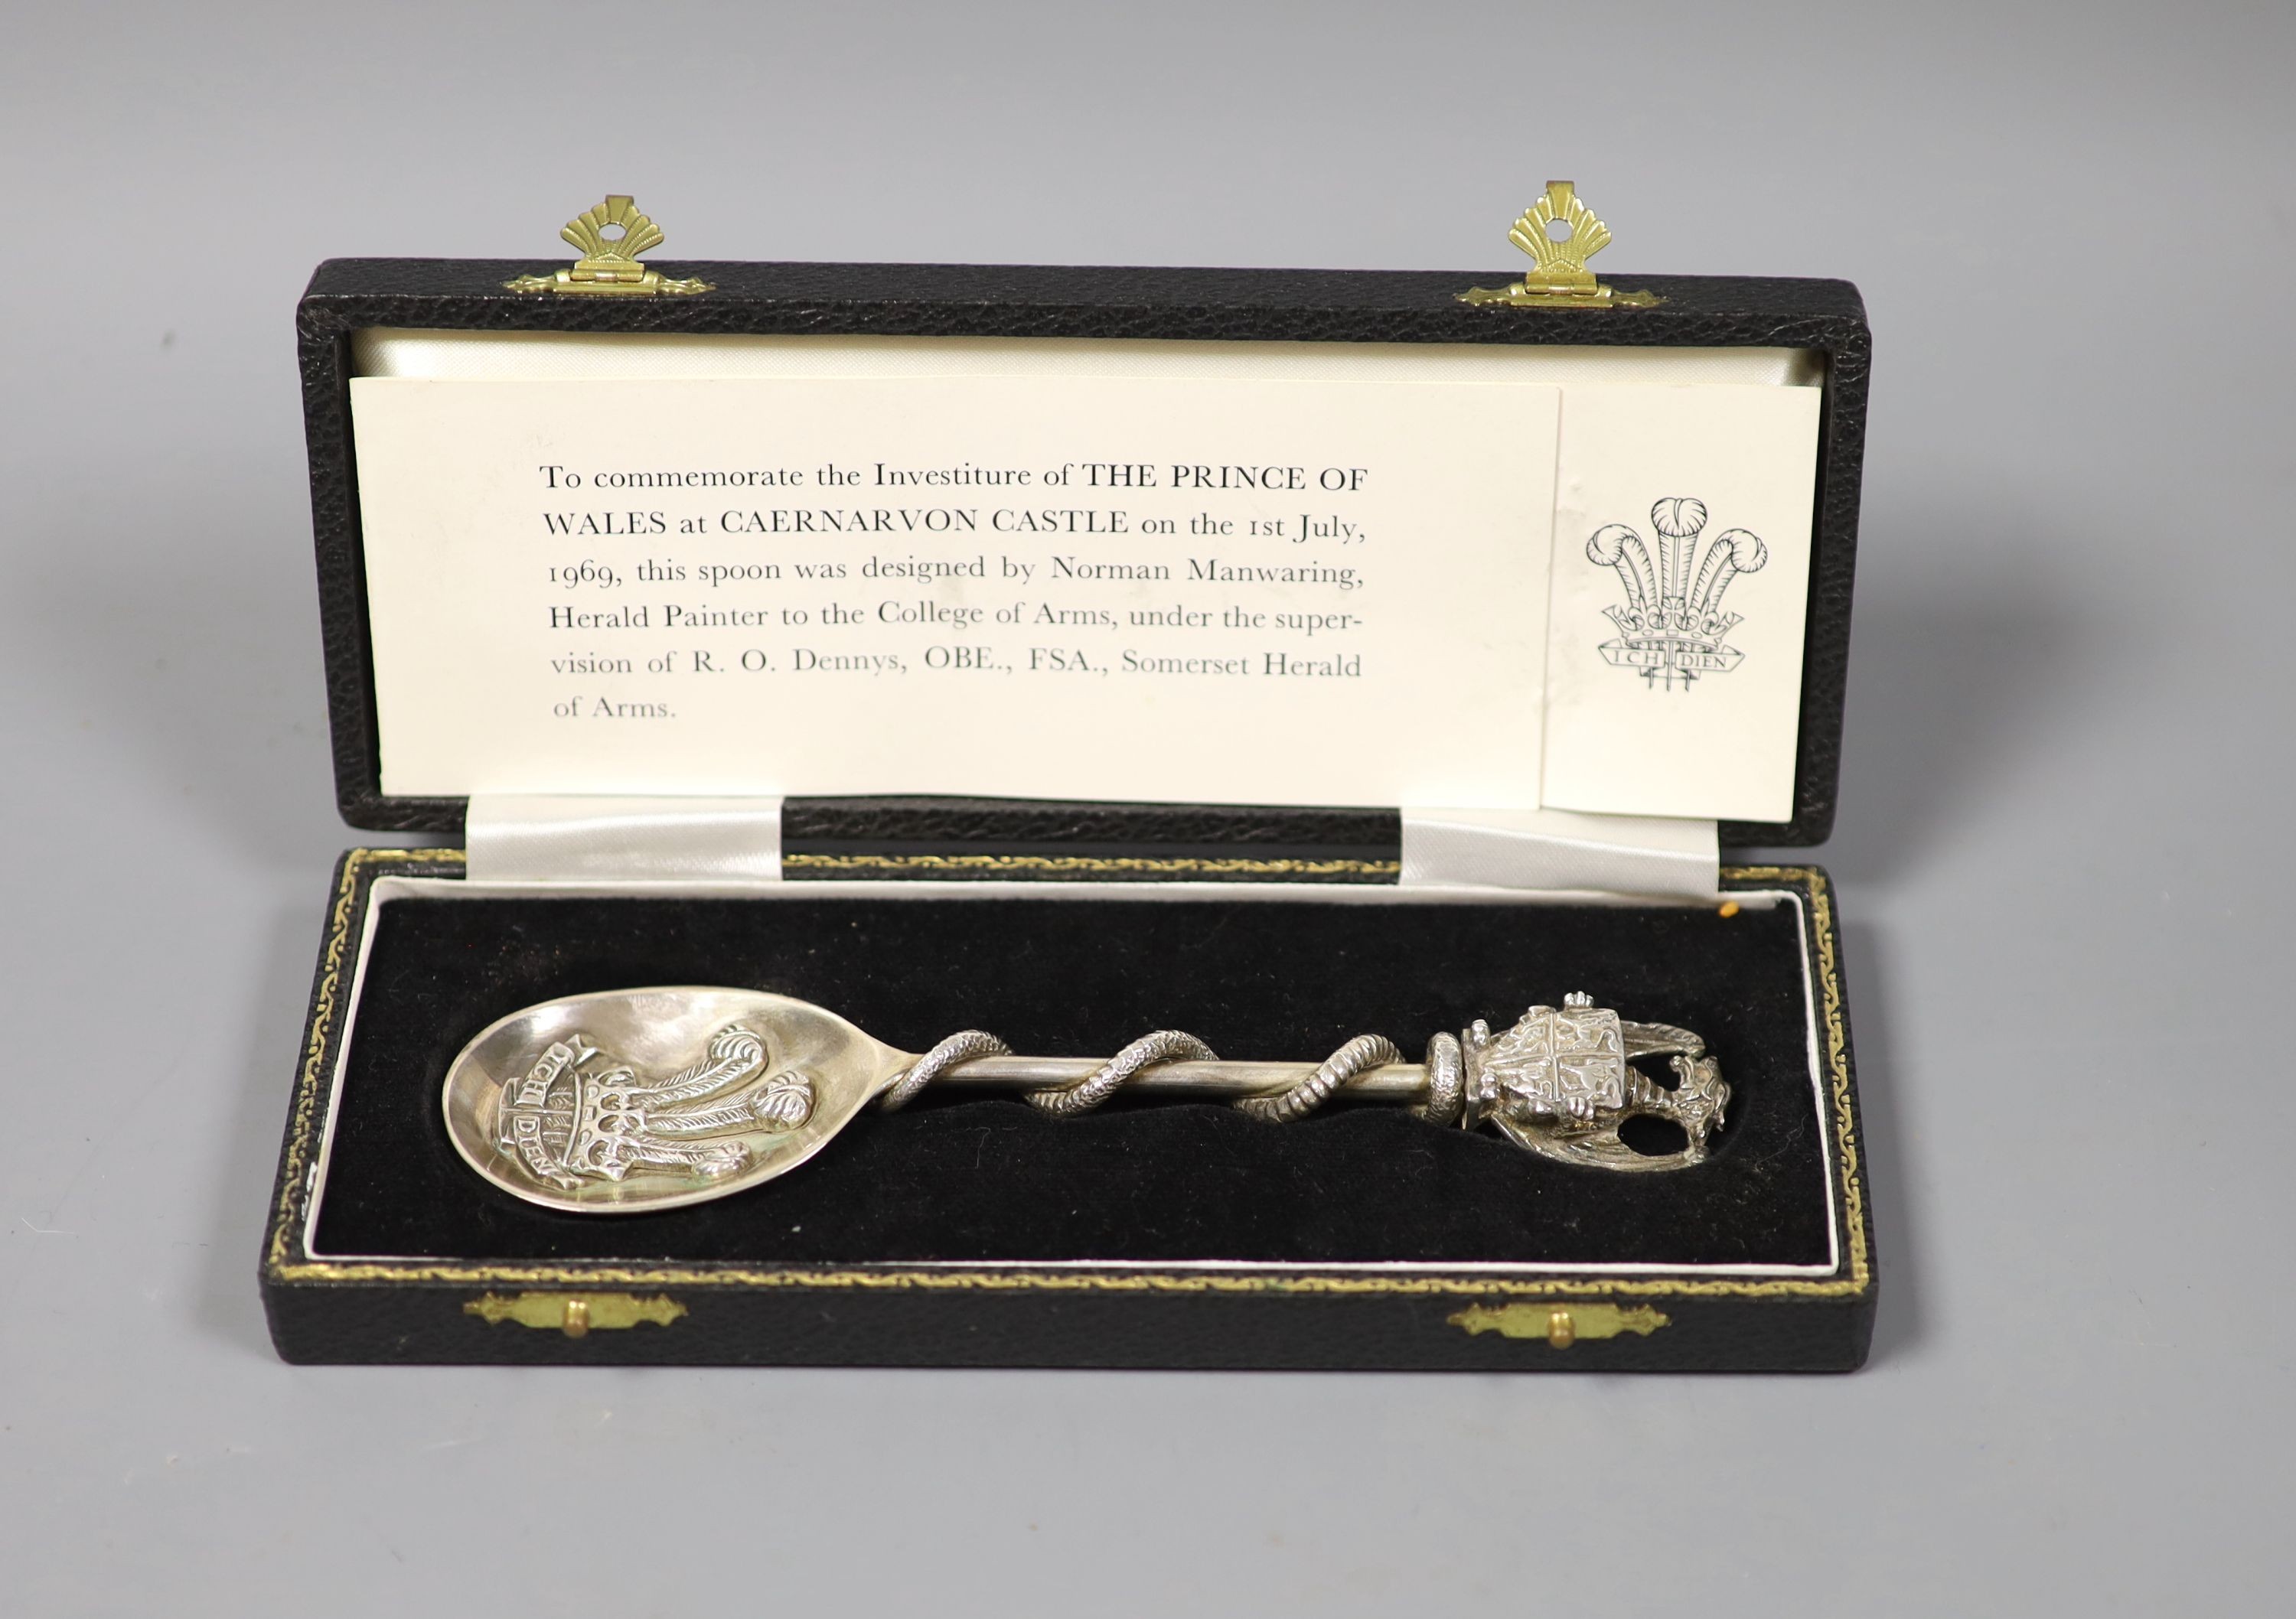 A cased silver Prince of Wales investiture spoons, J.D. Beardmore, London, 1969, 15.6cm.